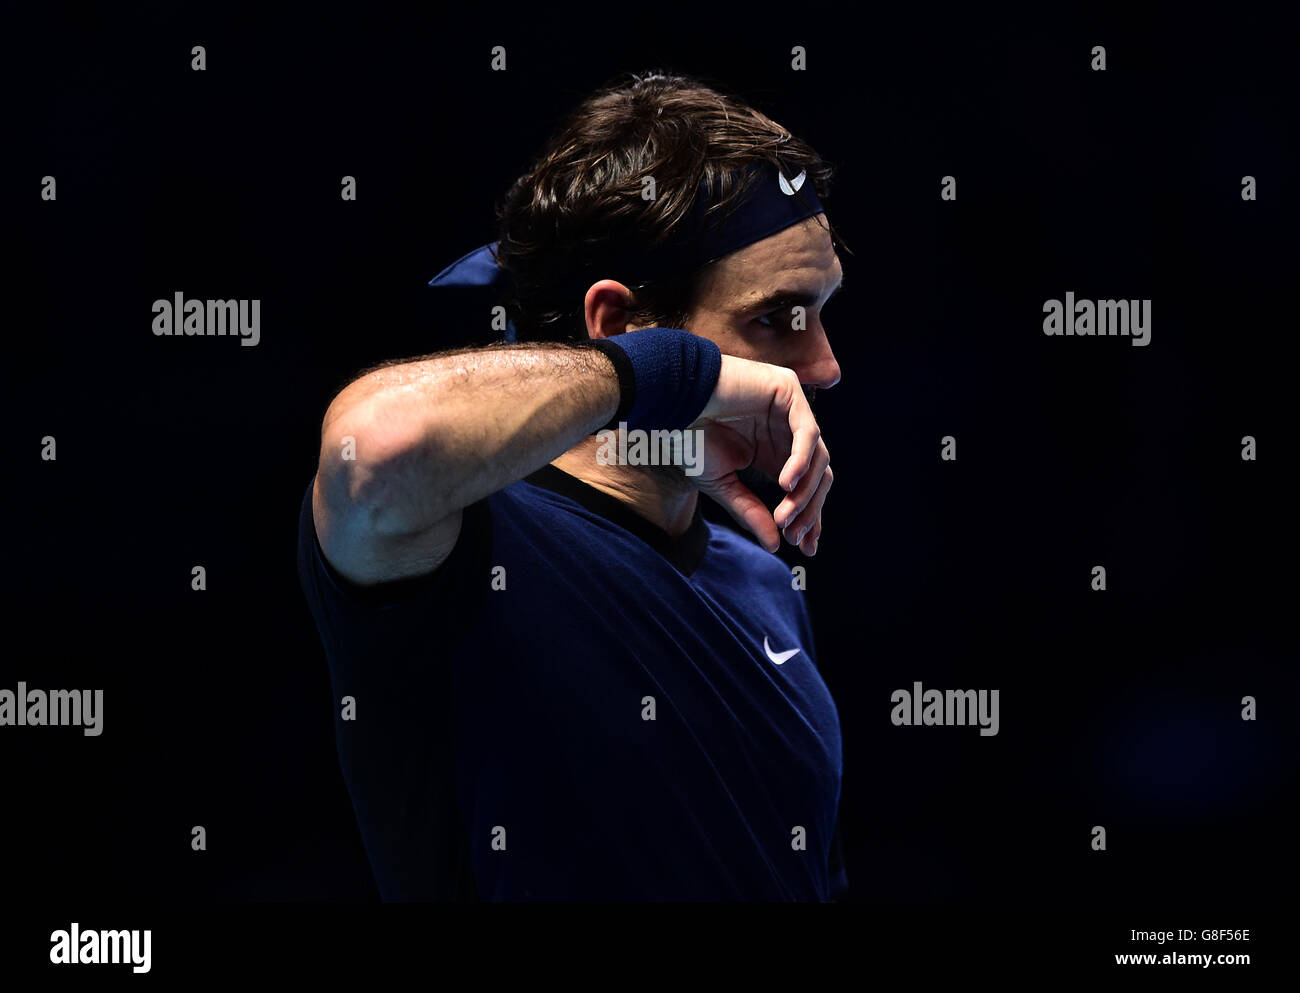 Switzerland's Roger Federer during the Final of the ATP World Tour Finals at the O2 Arena, London. PRESS ASSSOCIATION Photo. Picture date: Sunday November 22, 2015. See PA story TENNIS London. Photo credit should read: Adam Davy/PA Wire. Stock Photo